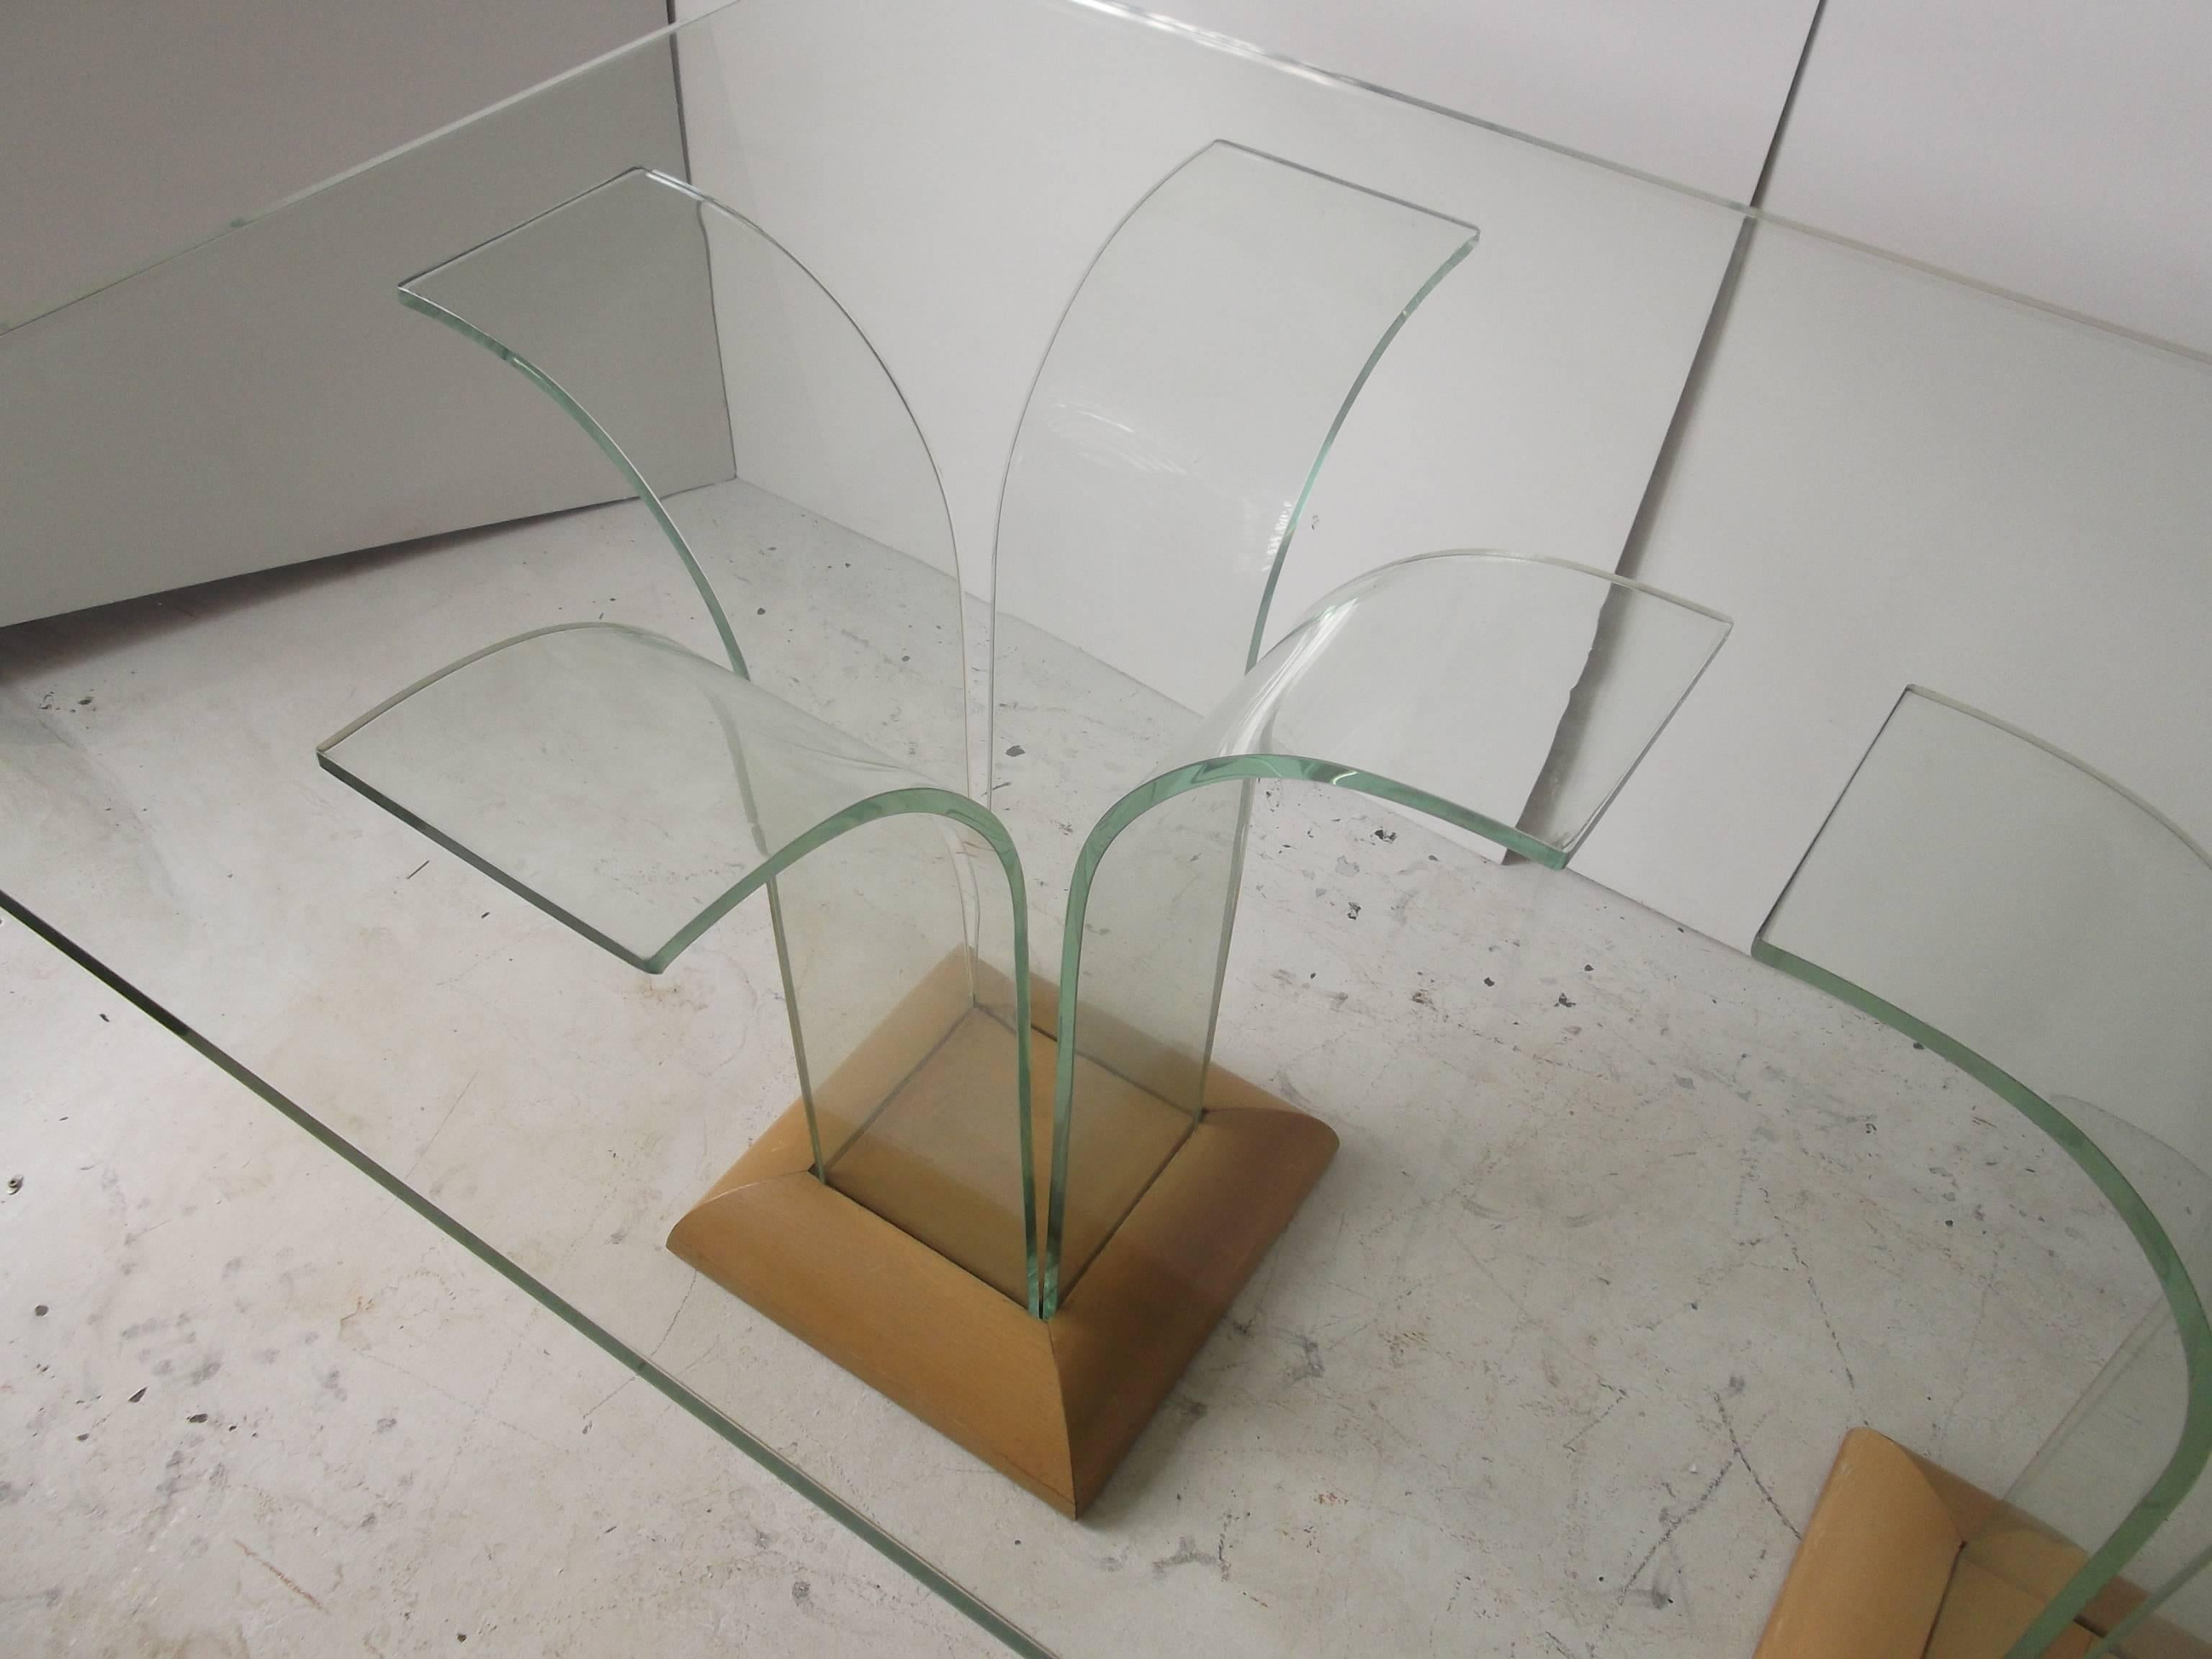 1940 Art Deco Bent Glass Dining Table by Ben Mildwoff for Modernage 1